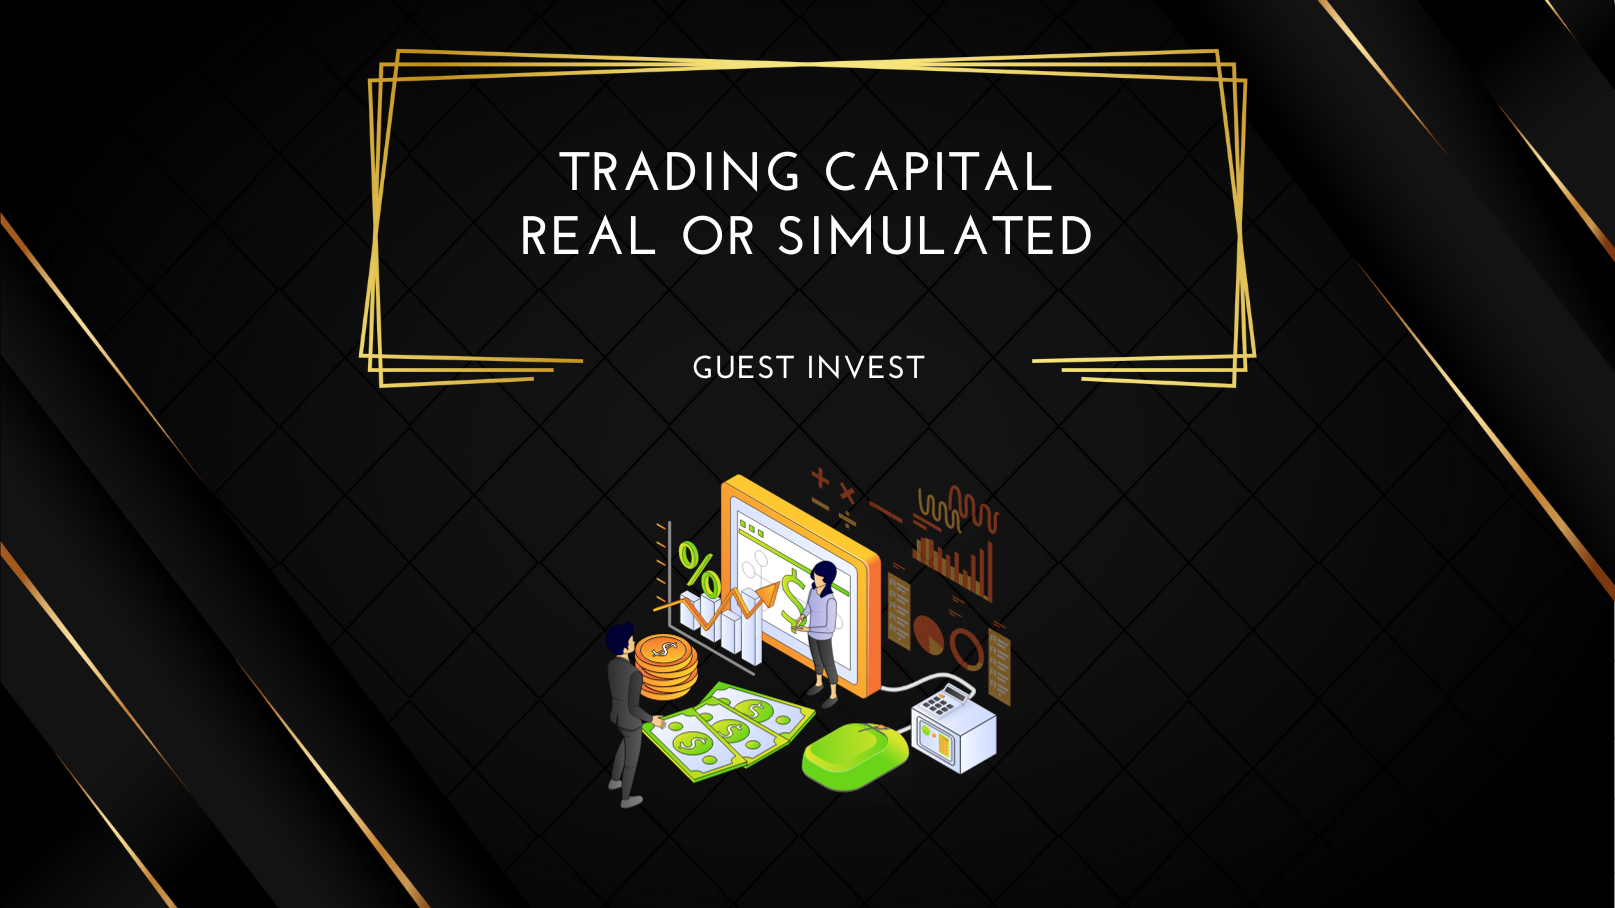 Proprietary trading firms offer traders a chance to work with significant capital that can be real or simulated